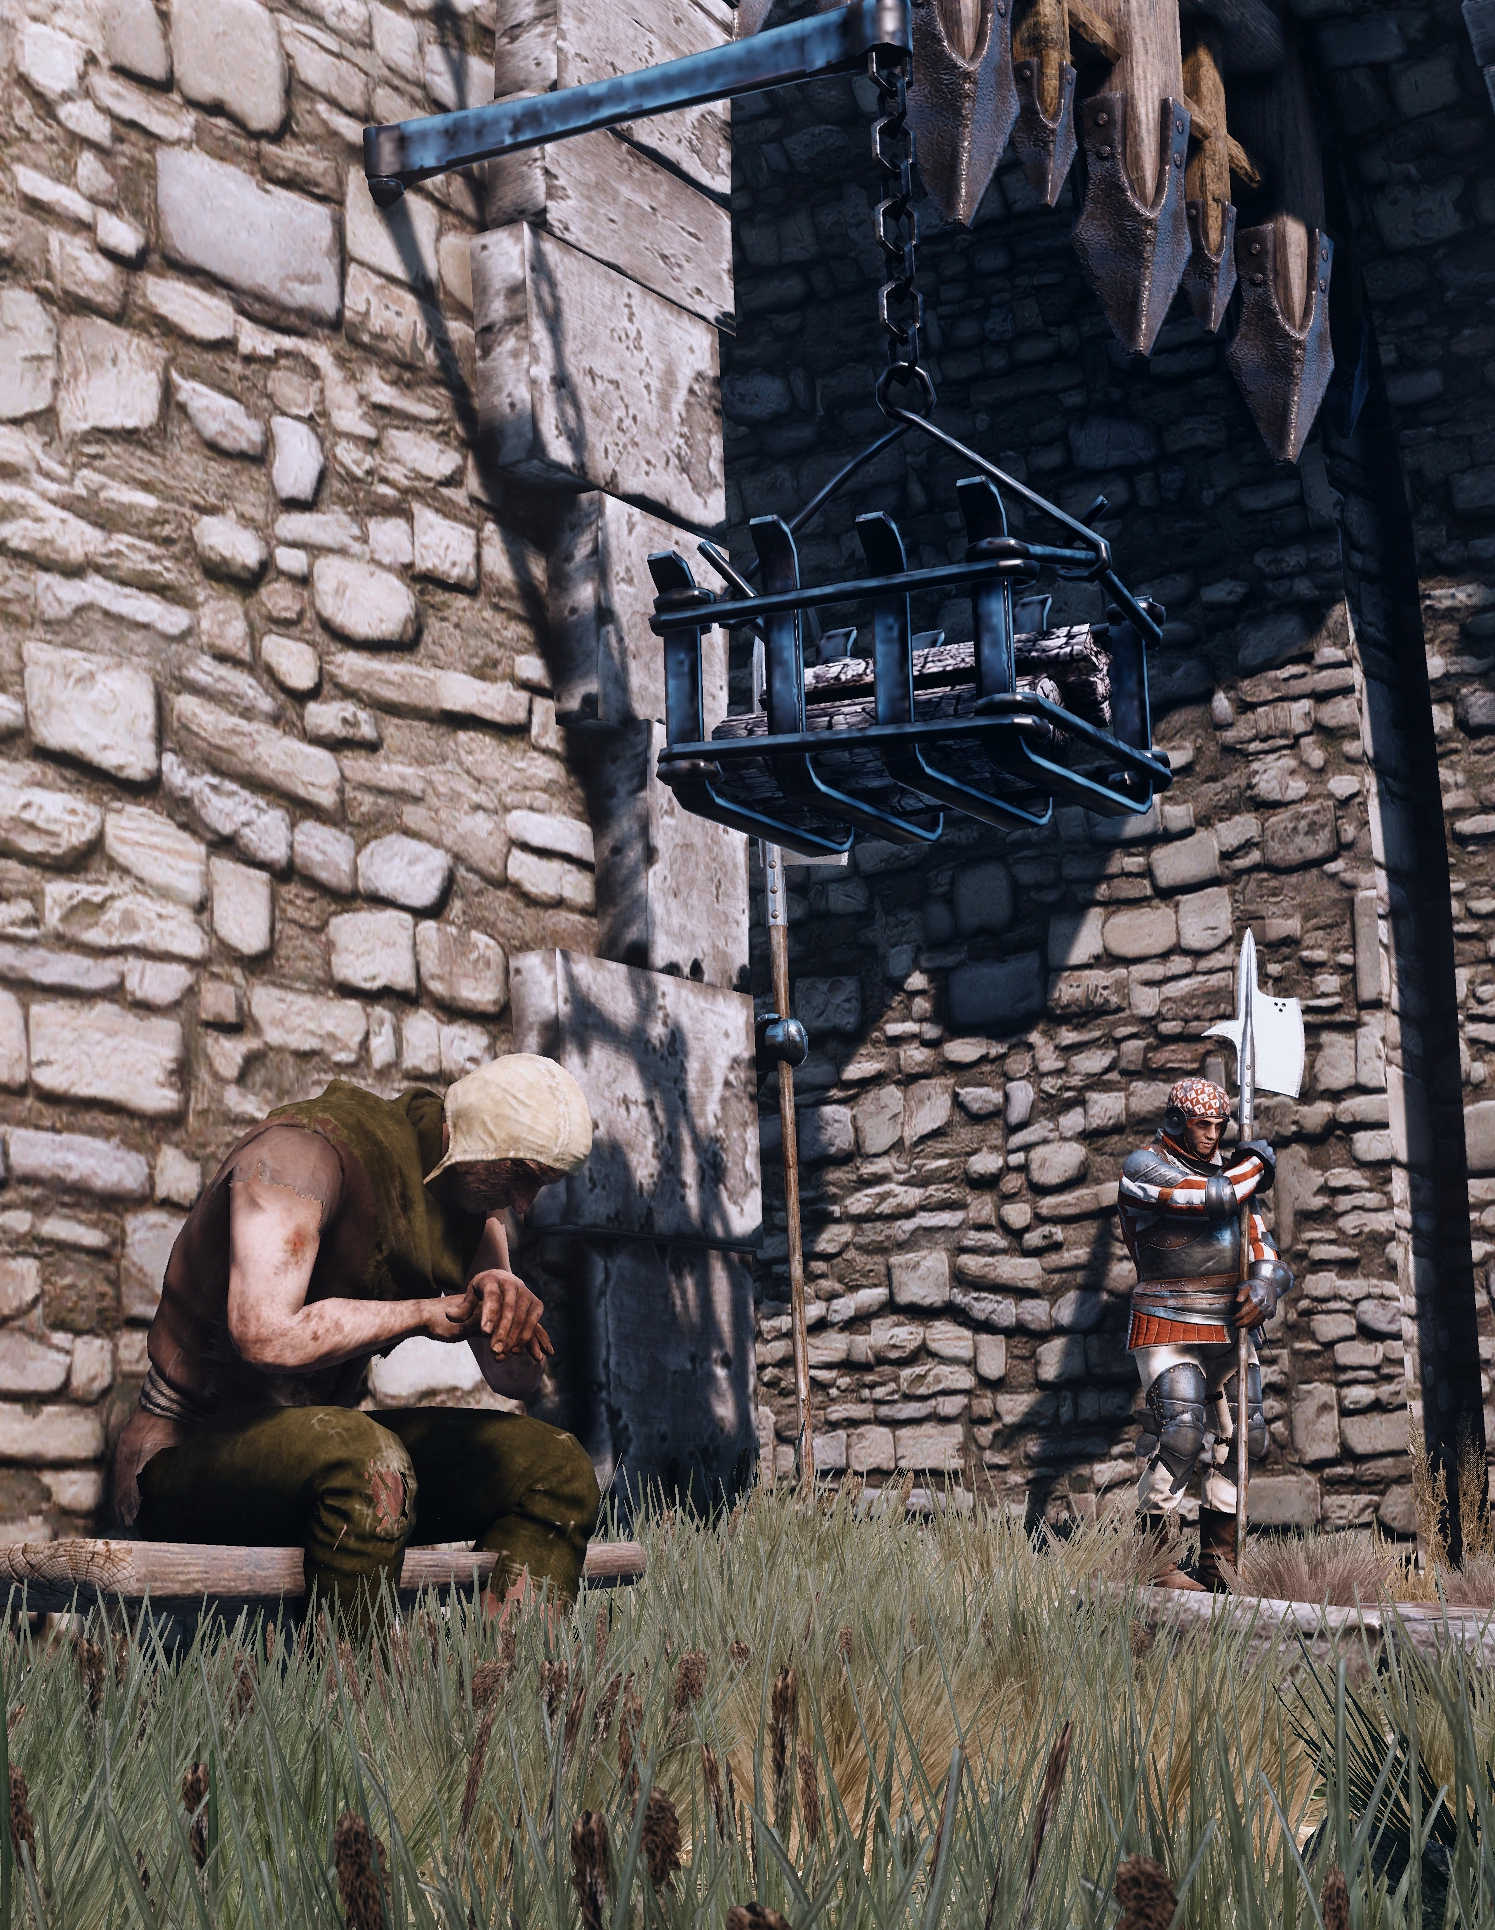 witcher3_2016_08_30_23isgy.jpg